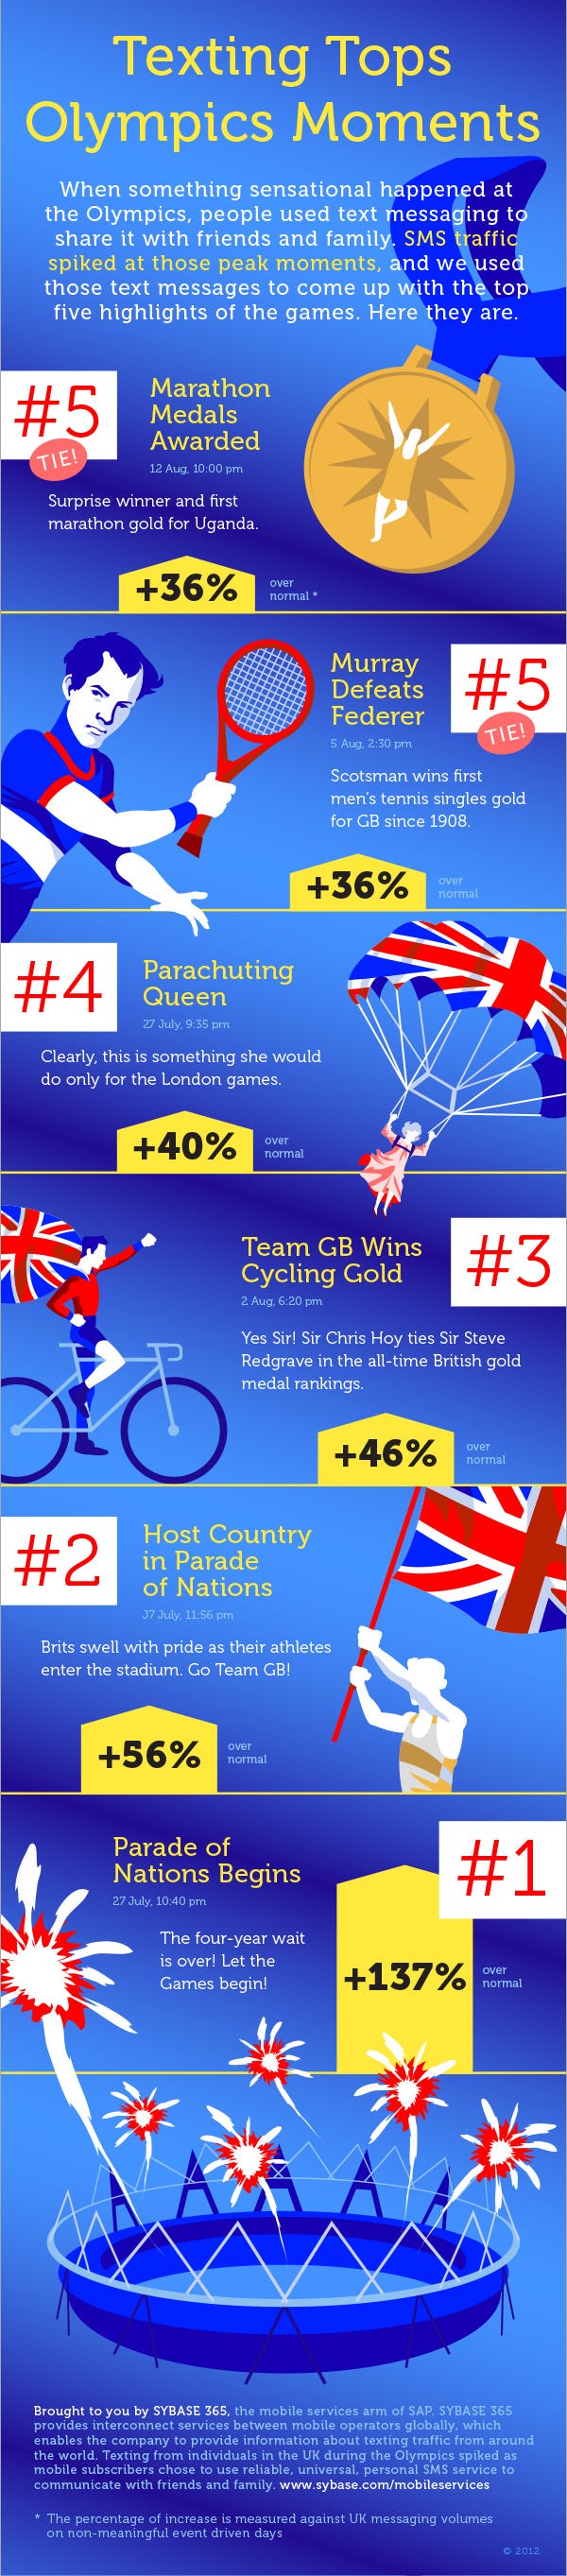 Six Most Texted Olympic 2012 Moments